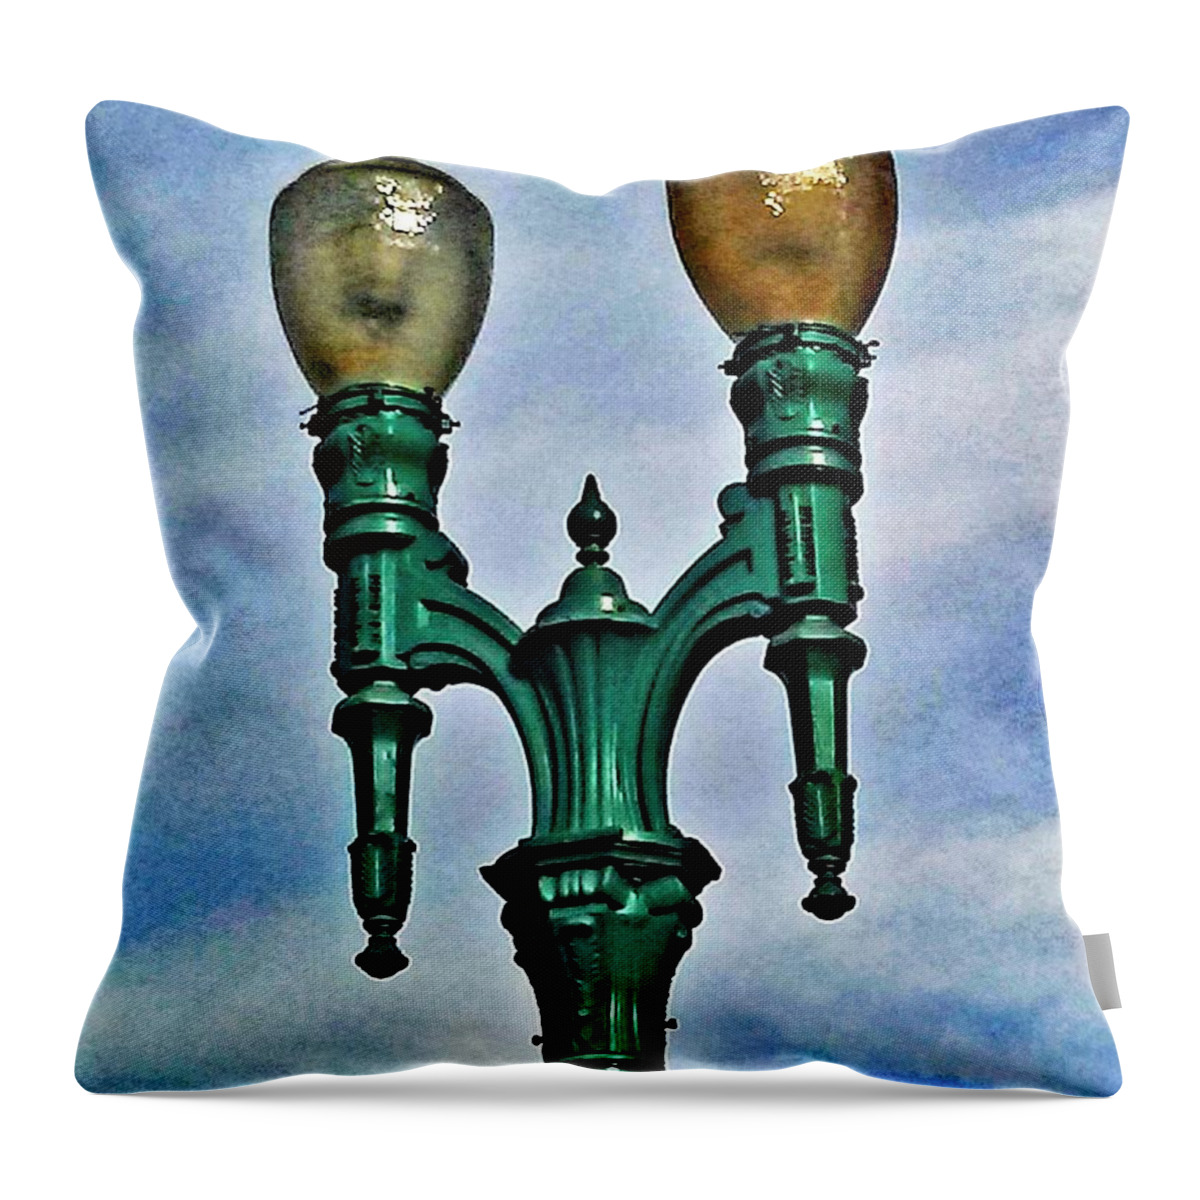 Streetlight Throw Pillow featuring the photograph Trendy Streetlight by Andrew Lawrence